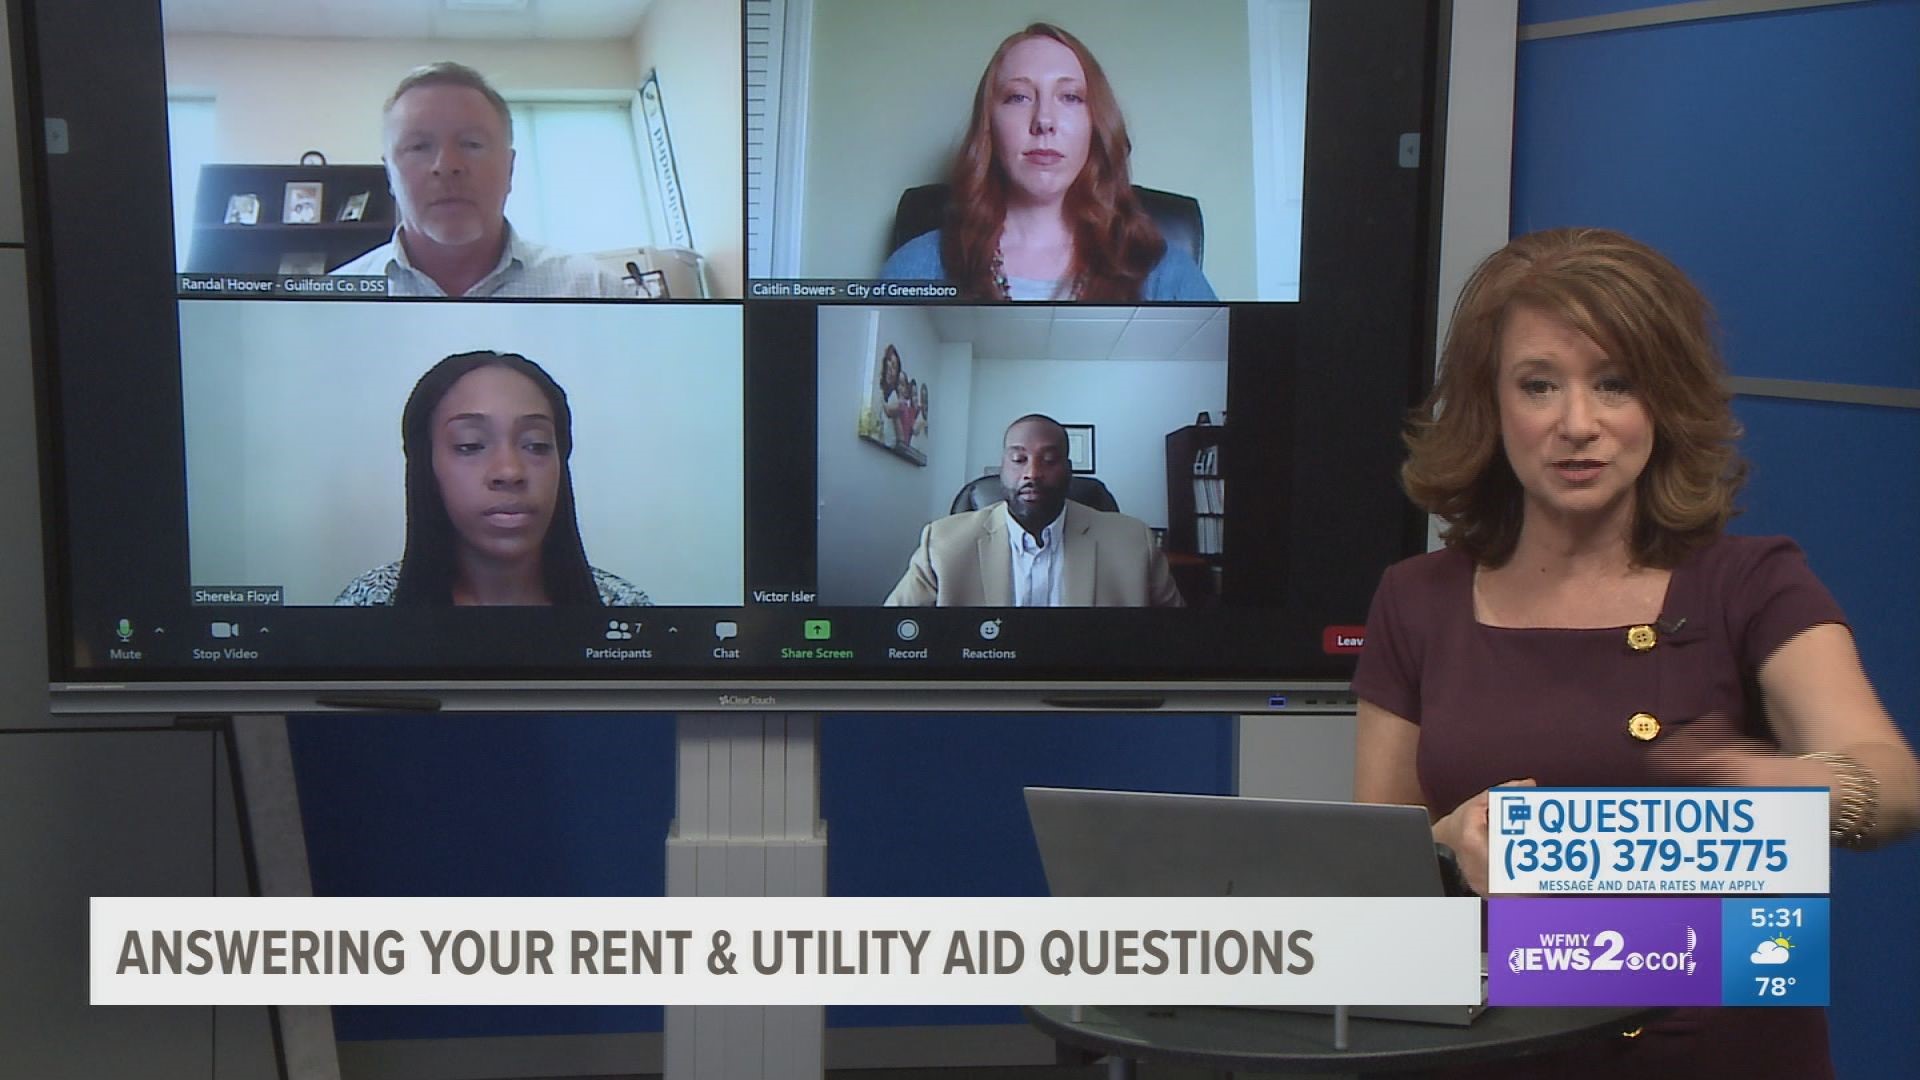 Experts talk about the Emergency Rental Assistance programs in Guilford and Forsyth counties, as well as Greensboro and Winston-Salem.